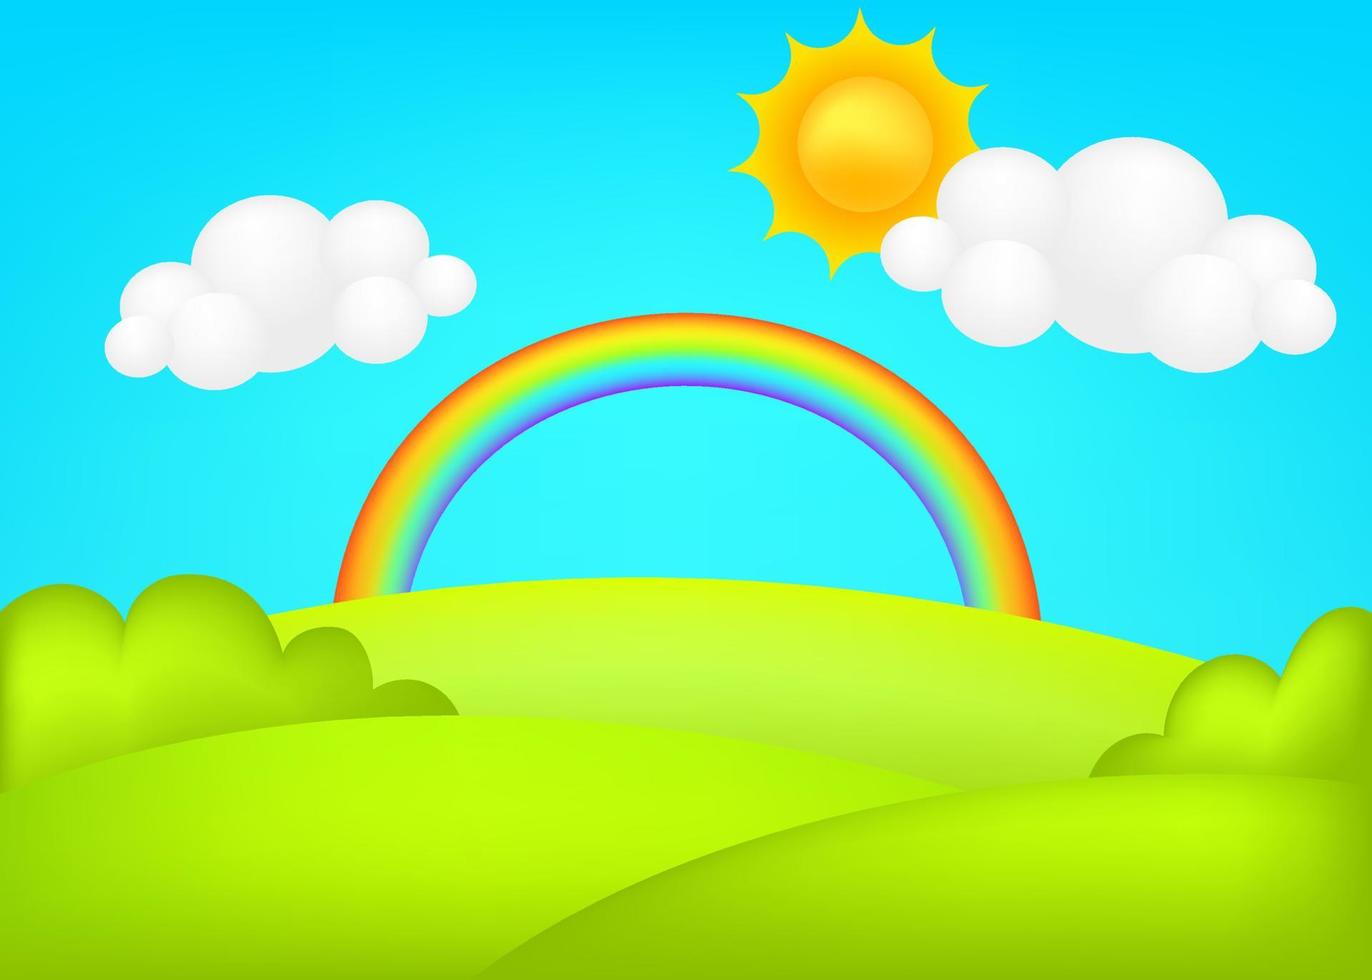 Meadow 3d vector illustration. Fantastic landscape with rainbow on green valley kids background. Colorful cute scenery with rainbow, spring green grassland, blue sky, sun, cloud for children's sites.